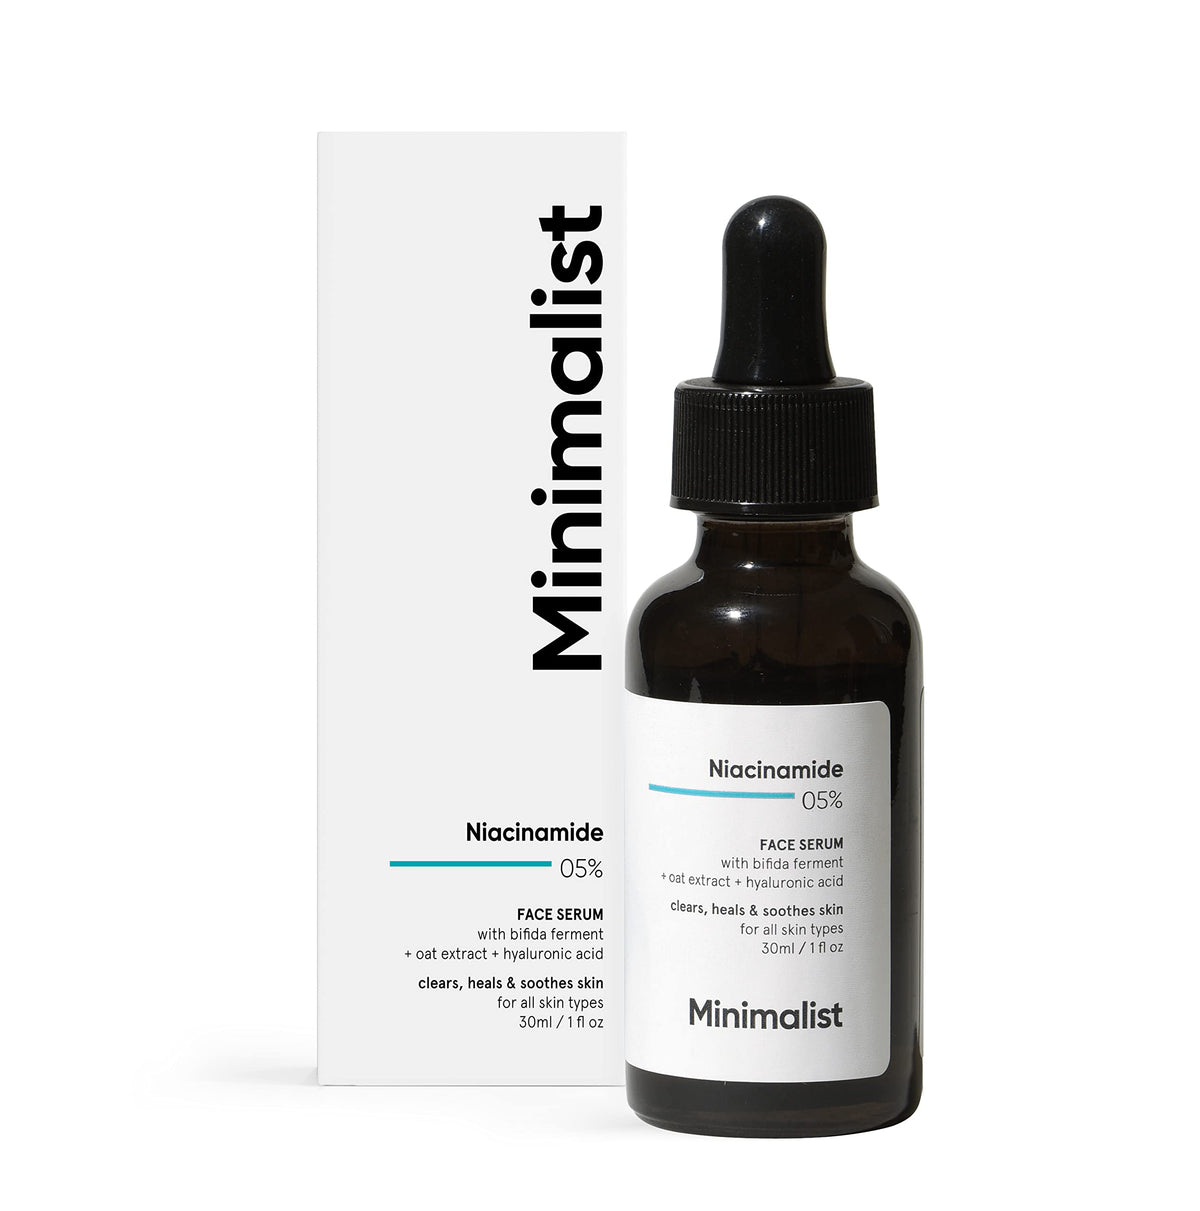 Minimalist 5% Niacinamide Face Serum for Clear Glowing Skin, Reduces Dullness, Hydrates & Repairs Skin with Vit B3 & Hyaluronic Acid, Day & Night Serum for Dry & Sensitive Skin, For Women & Men,30 ml